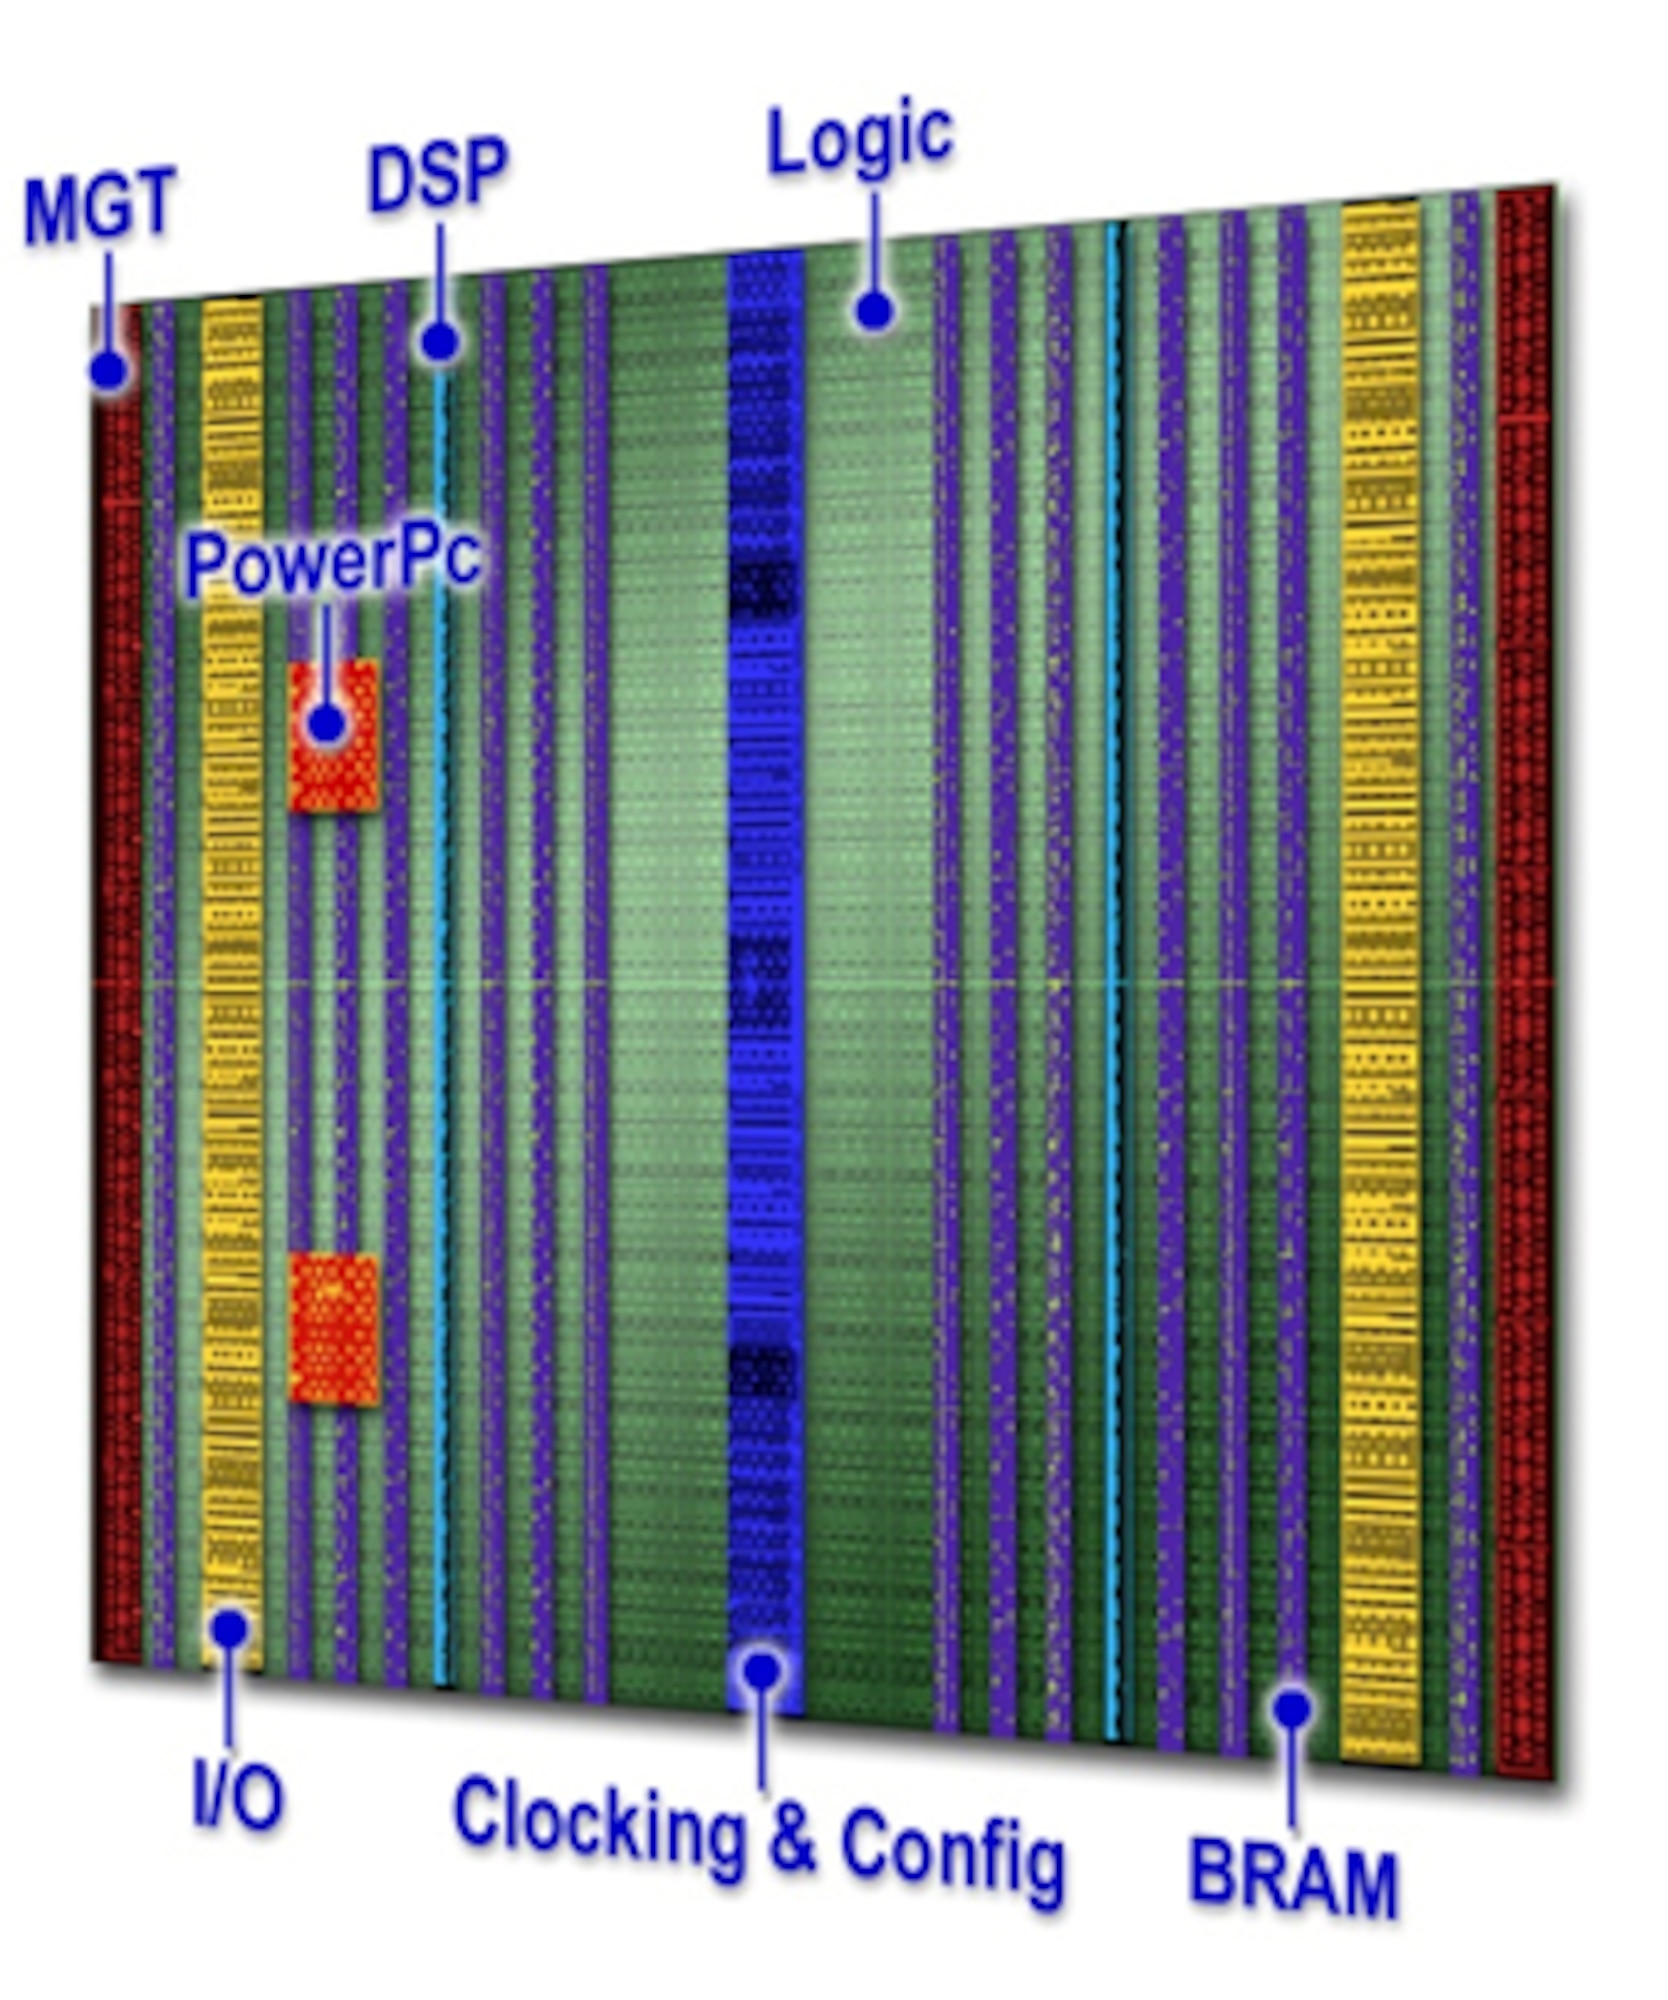 The layout of the Virtex-5 field programmable gate array, consisting of the various functions imbedded in the columnar architecture, is displayed. (Courtesy of Xilinx, Inc.)